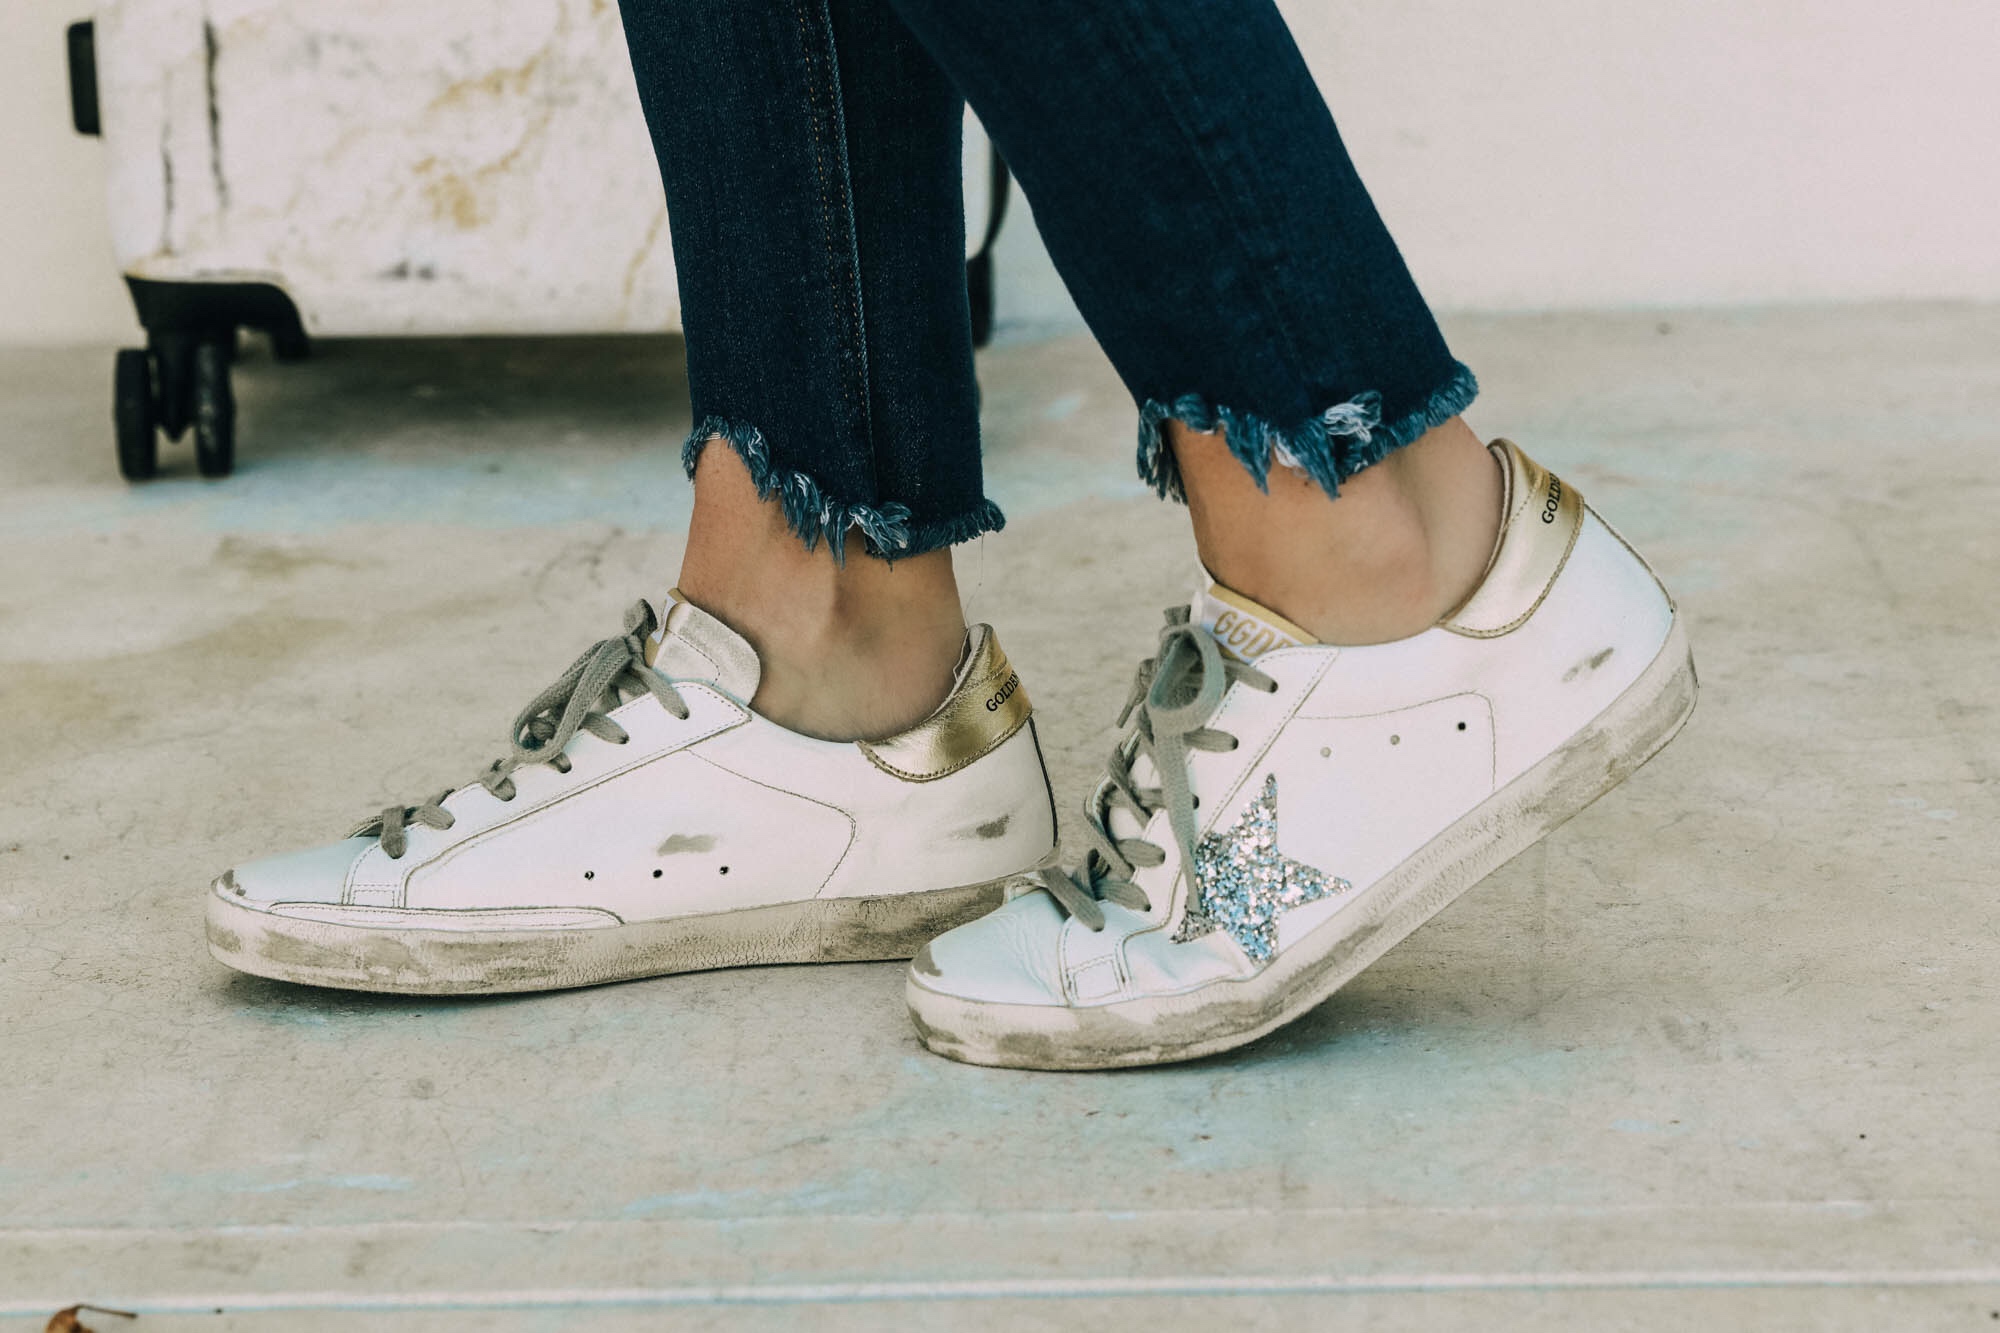 Golden Goose Sneakers Review, Fashion blogger Erin Busbee of Bubsee Style wearing Golden Goose superstar sneakers with frayed jeans in the Bahamas